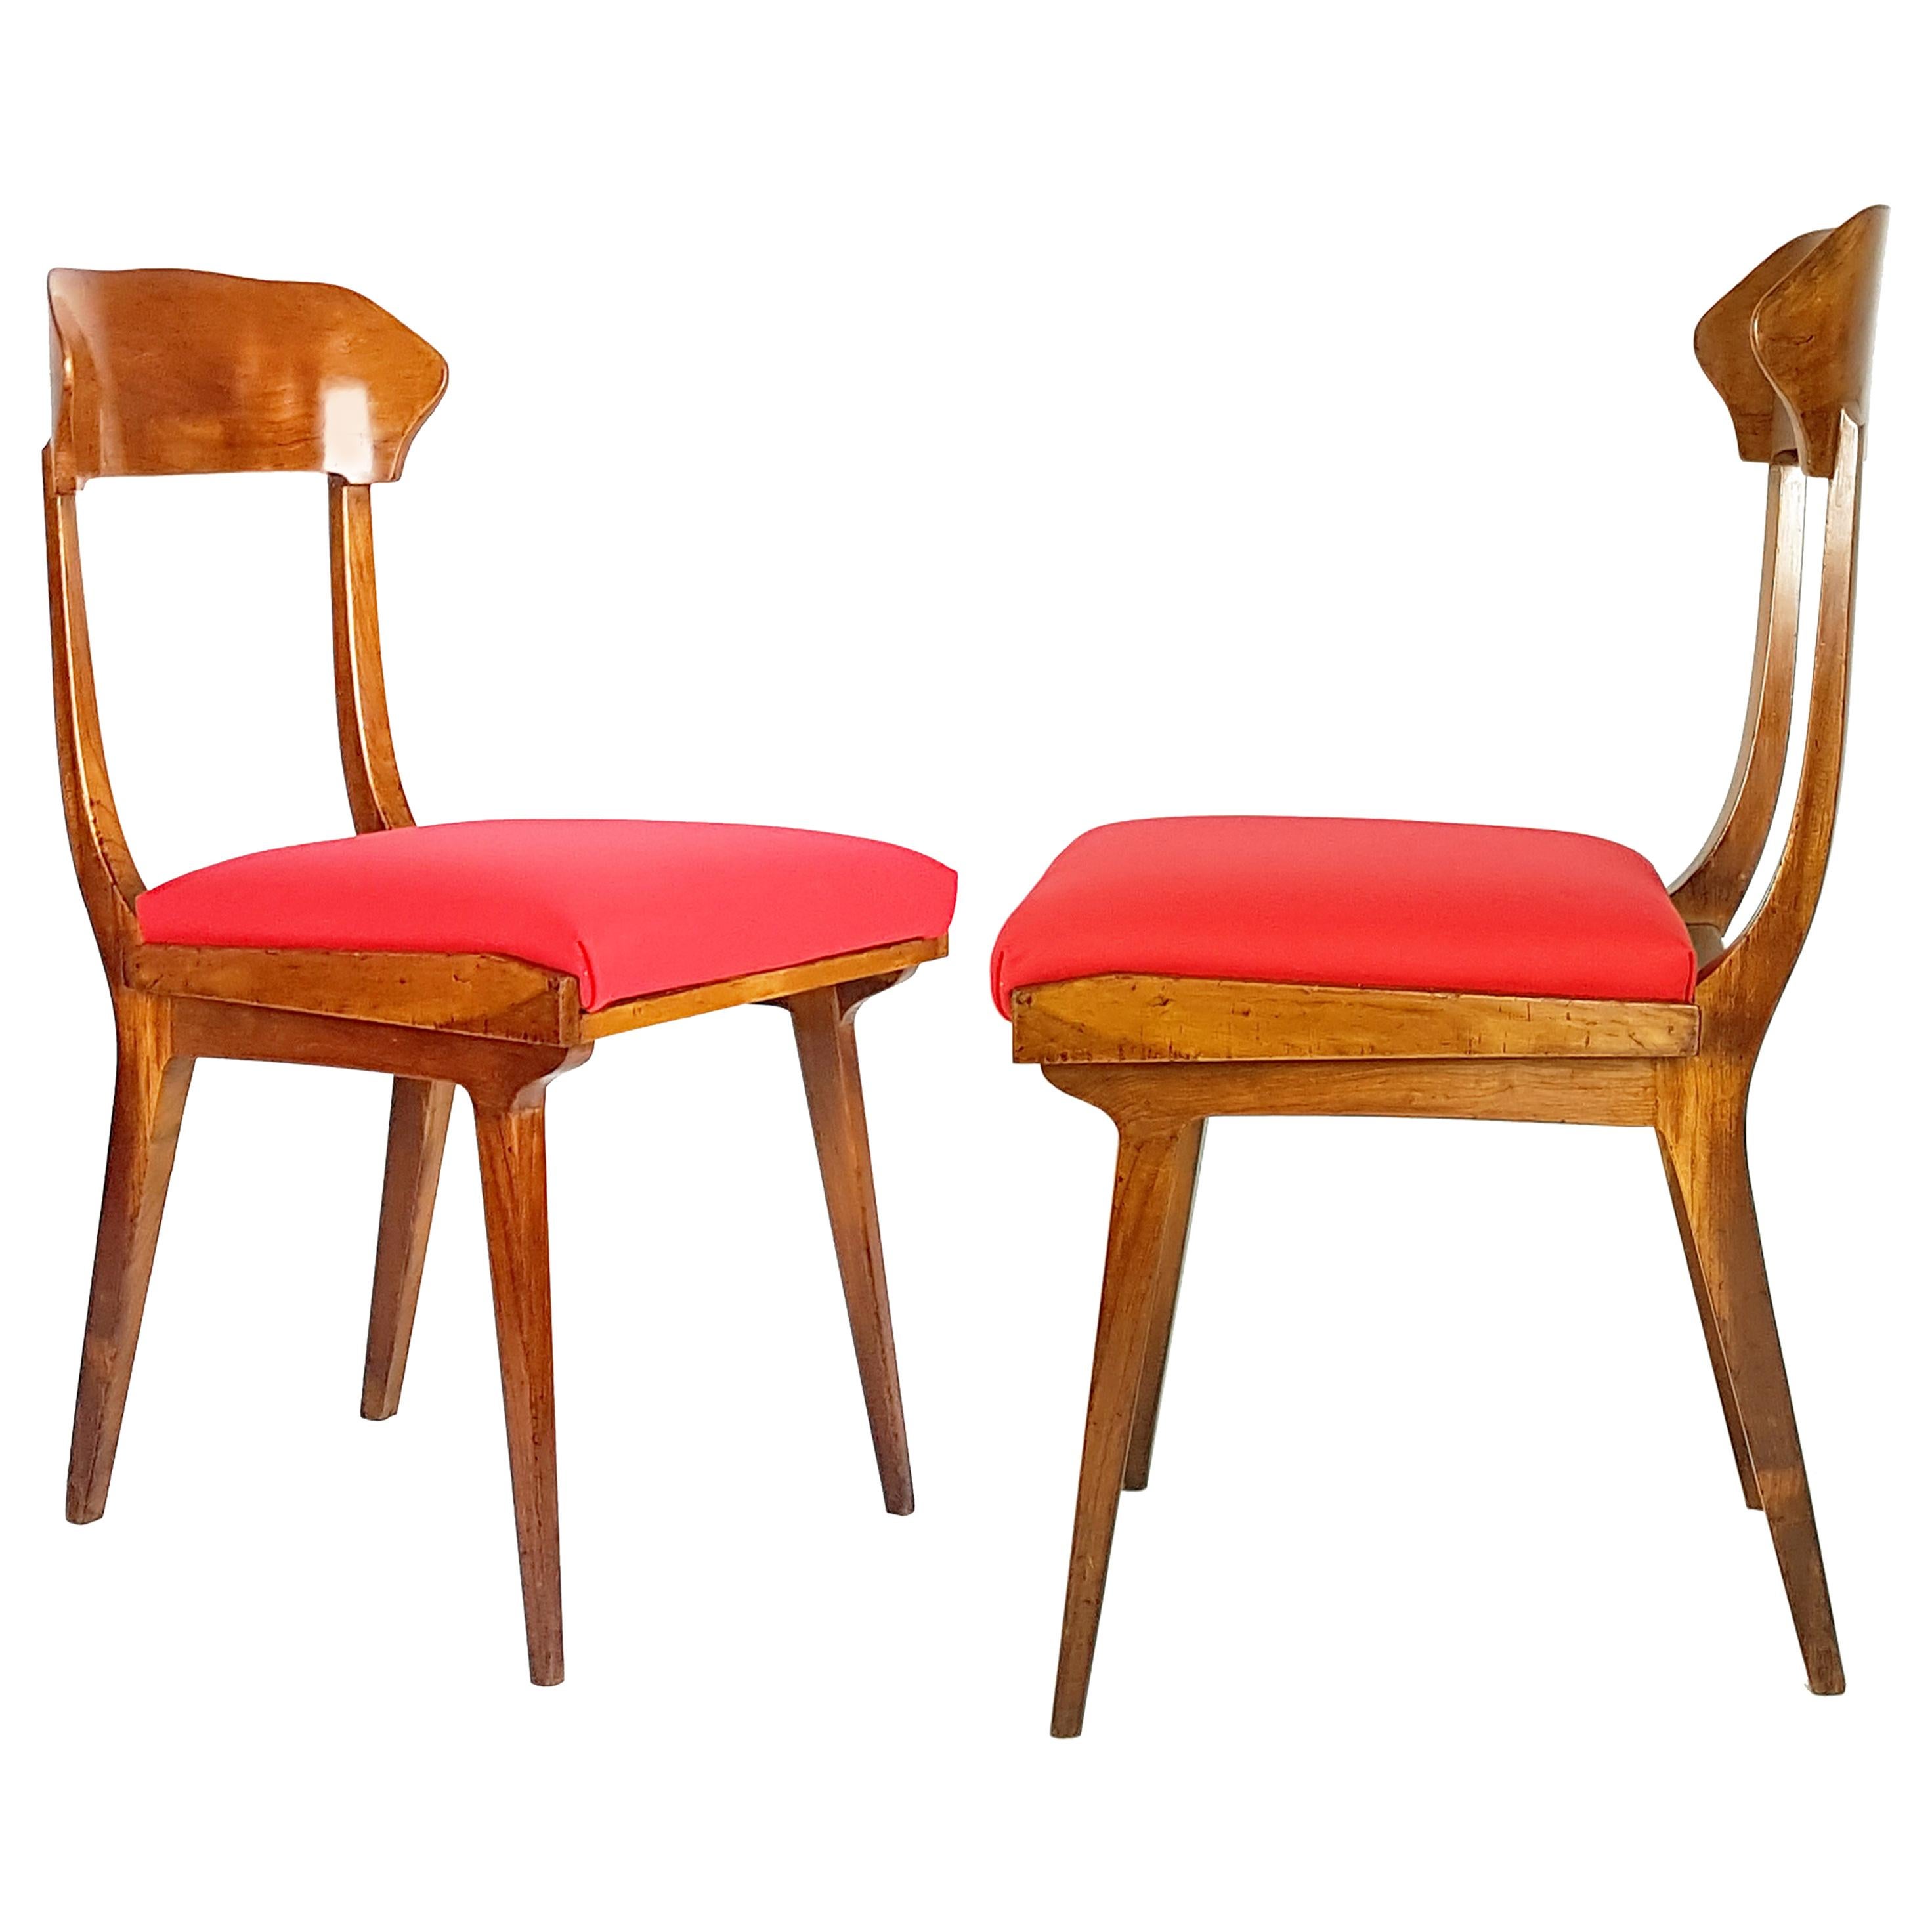 Midcentury Wood and Red Fabric Side Chairs from Fratelli Barni Mobili d'Arte